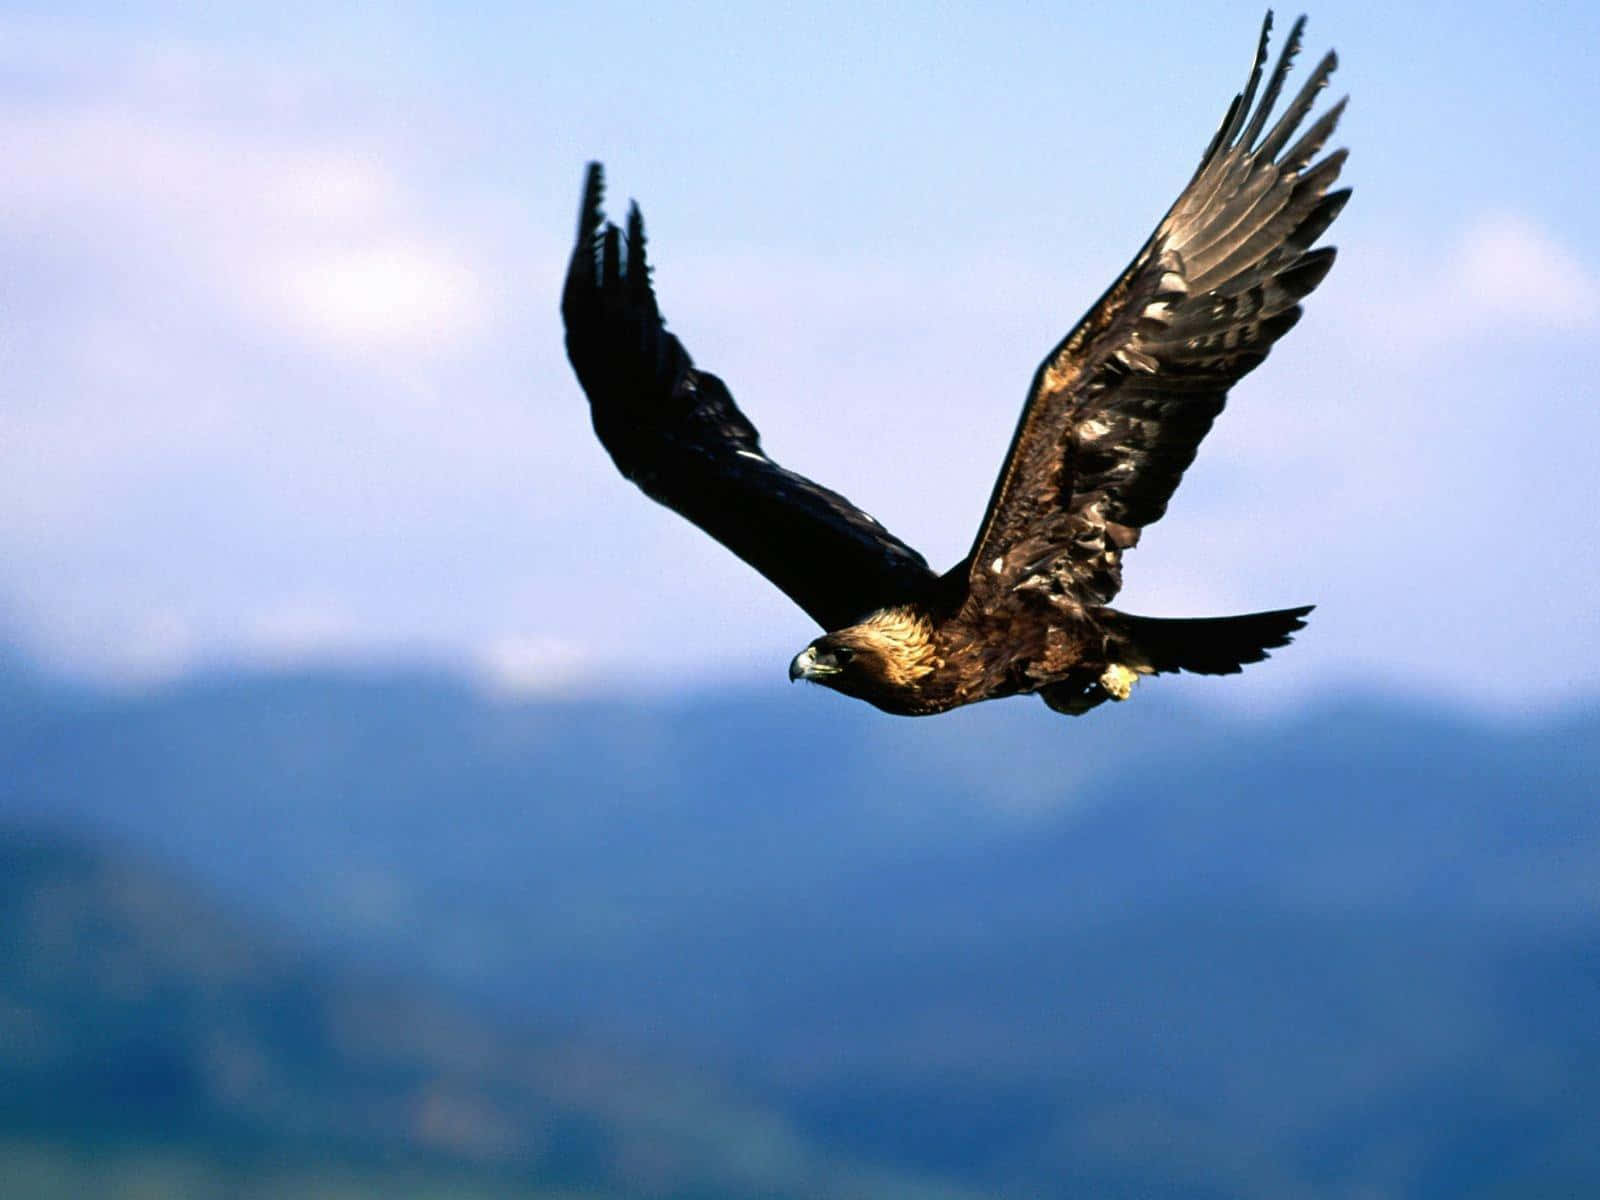 “Soaring with Majestic Beauty: An Eagle in Flight”